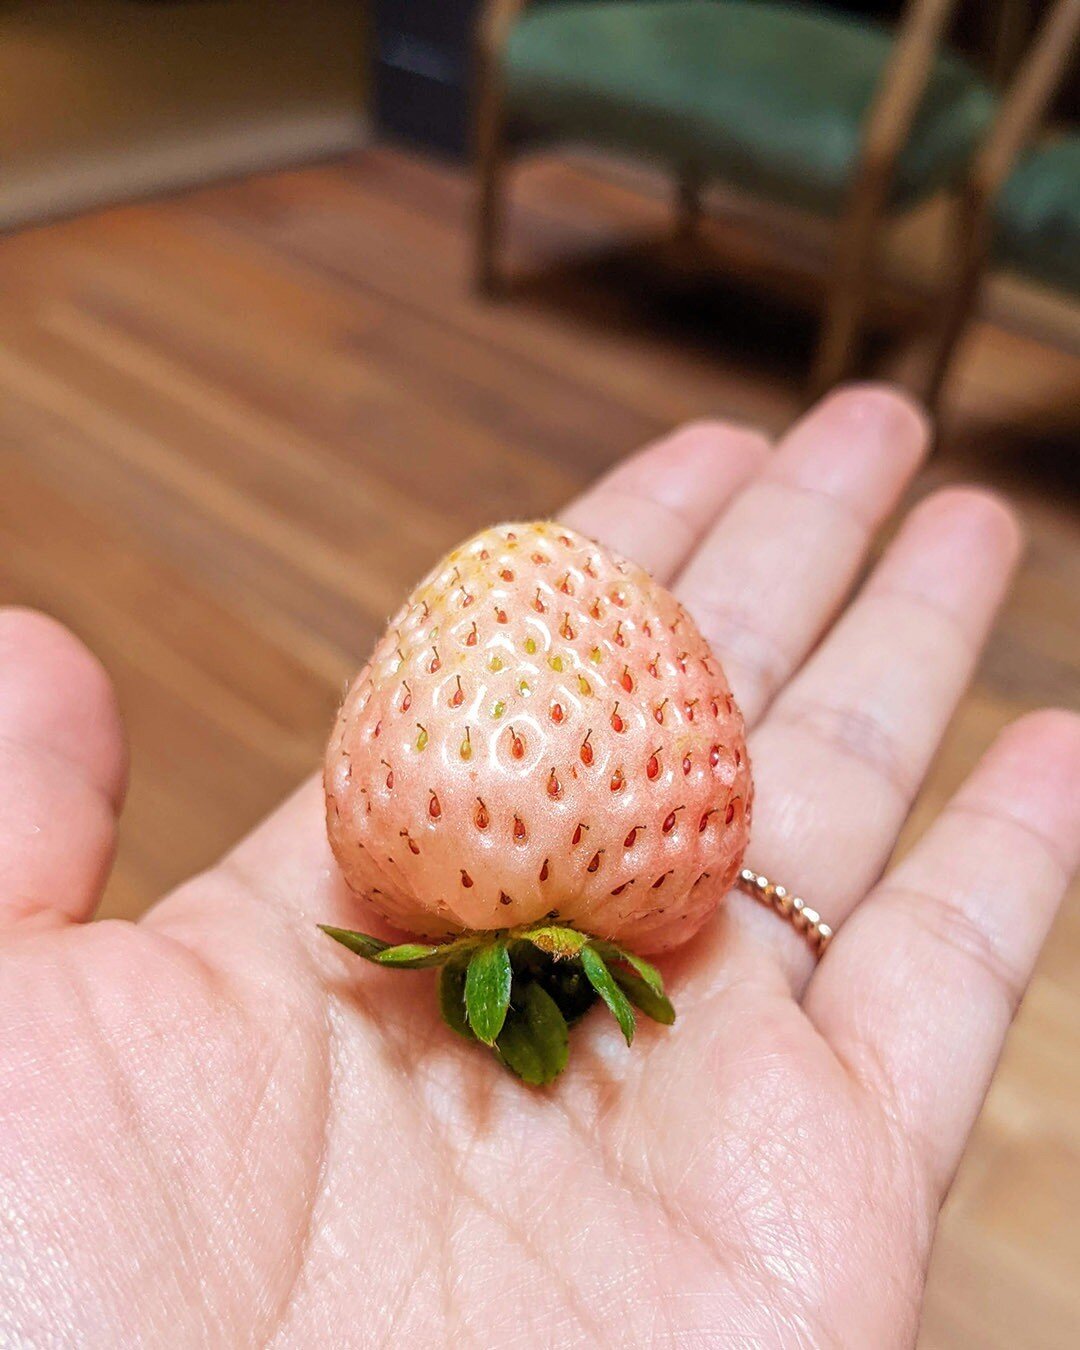 Took a break in our hotel lounge and had my first #pineberries, they taste similar to strawberries imo.
.
.
.
.
#newfood #sanfrancisco #travel #ilovetravel #domestictravel #westcoast #exoticfruit #cheaphotels #travelblogger #traveldiaries #pinkinteri